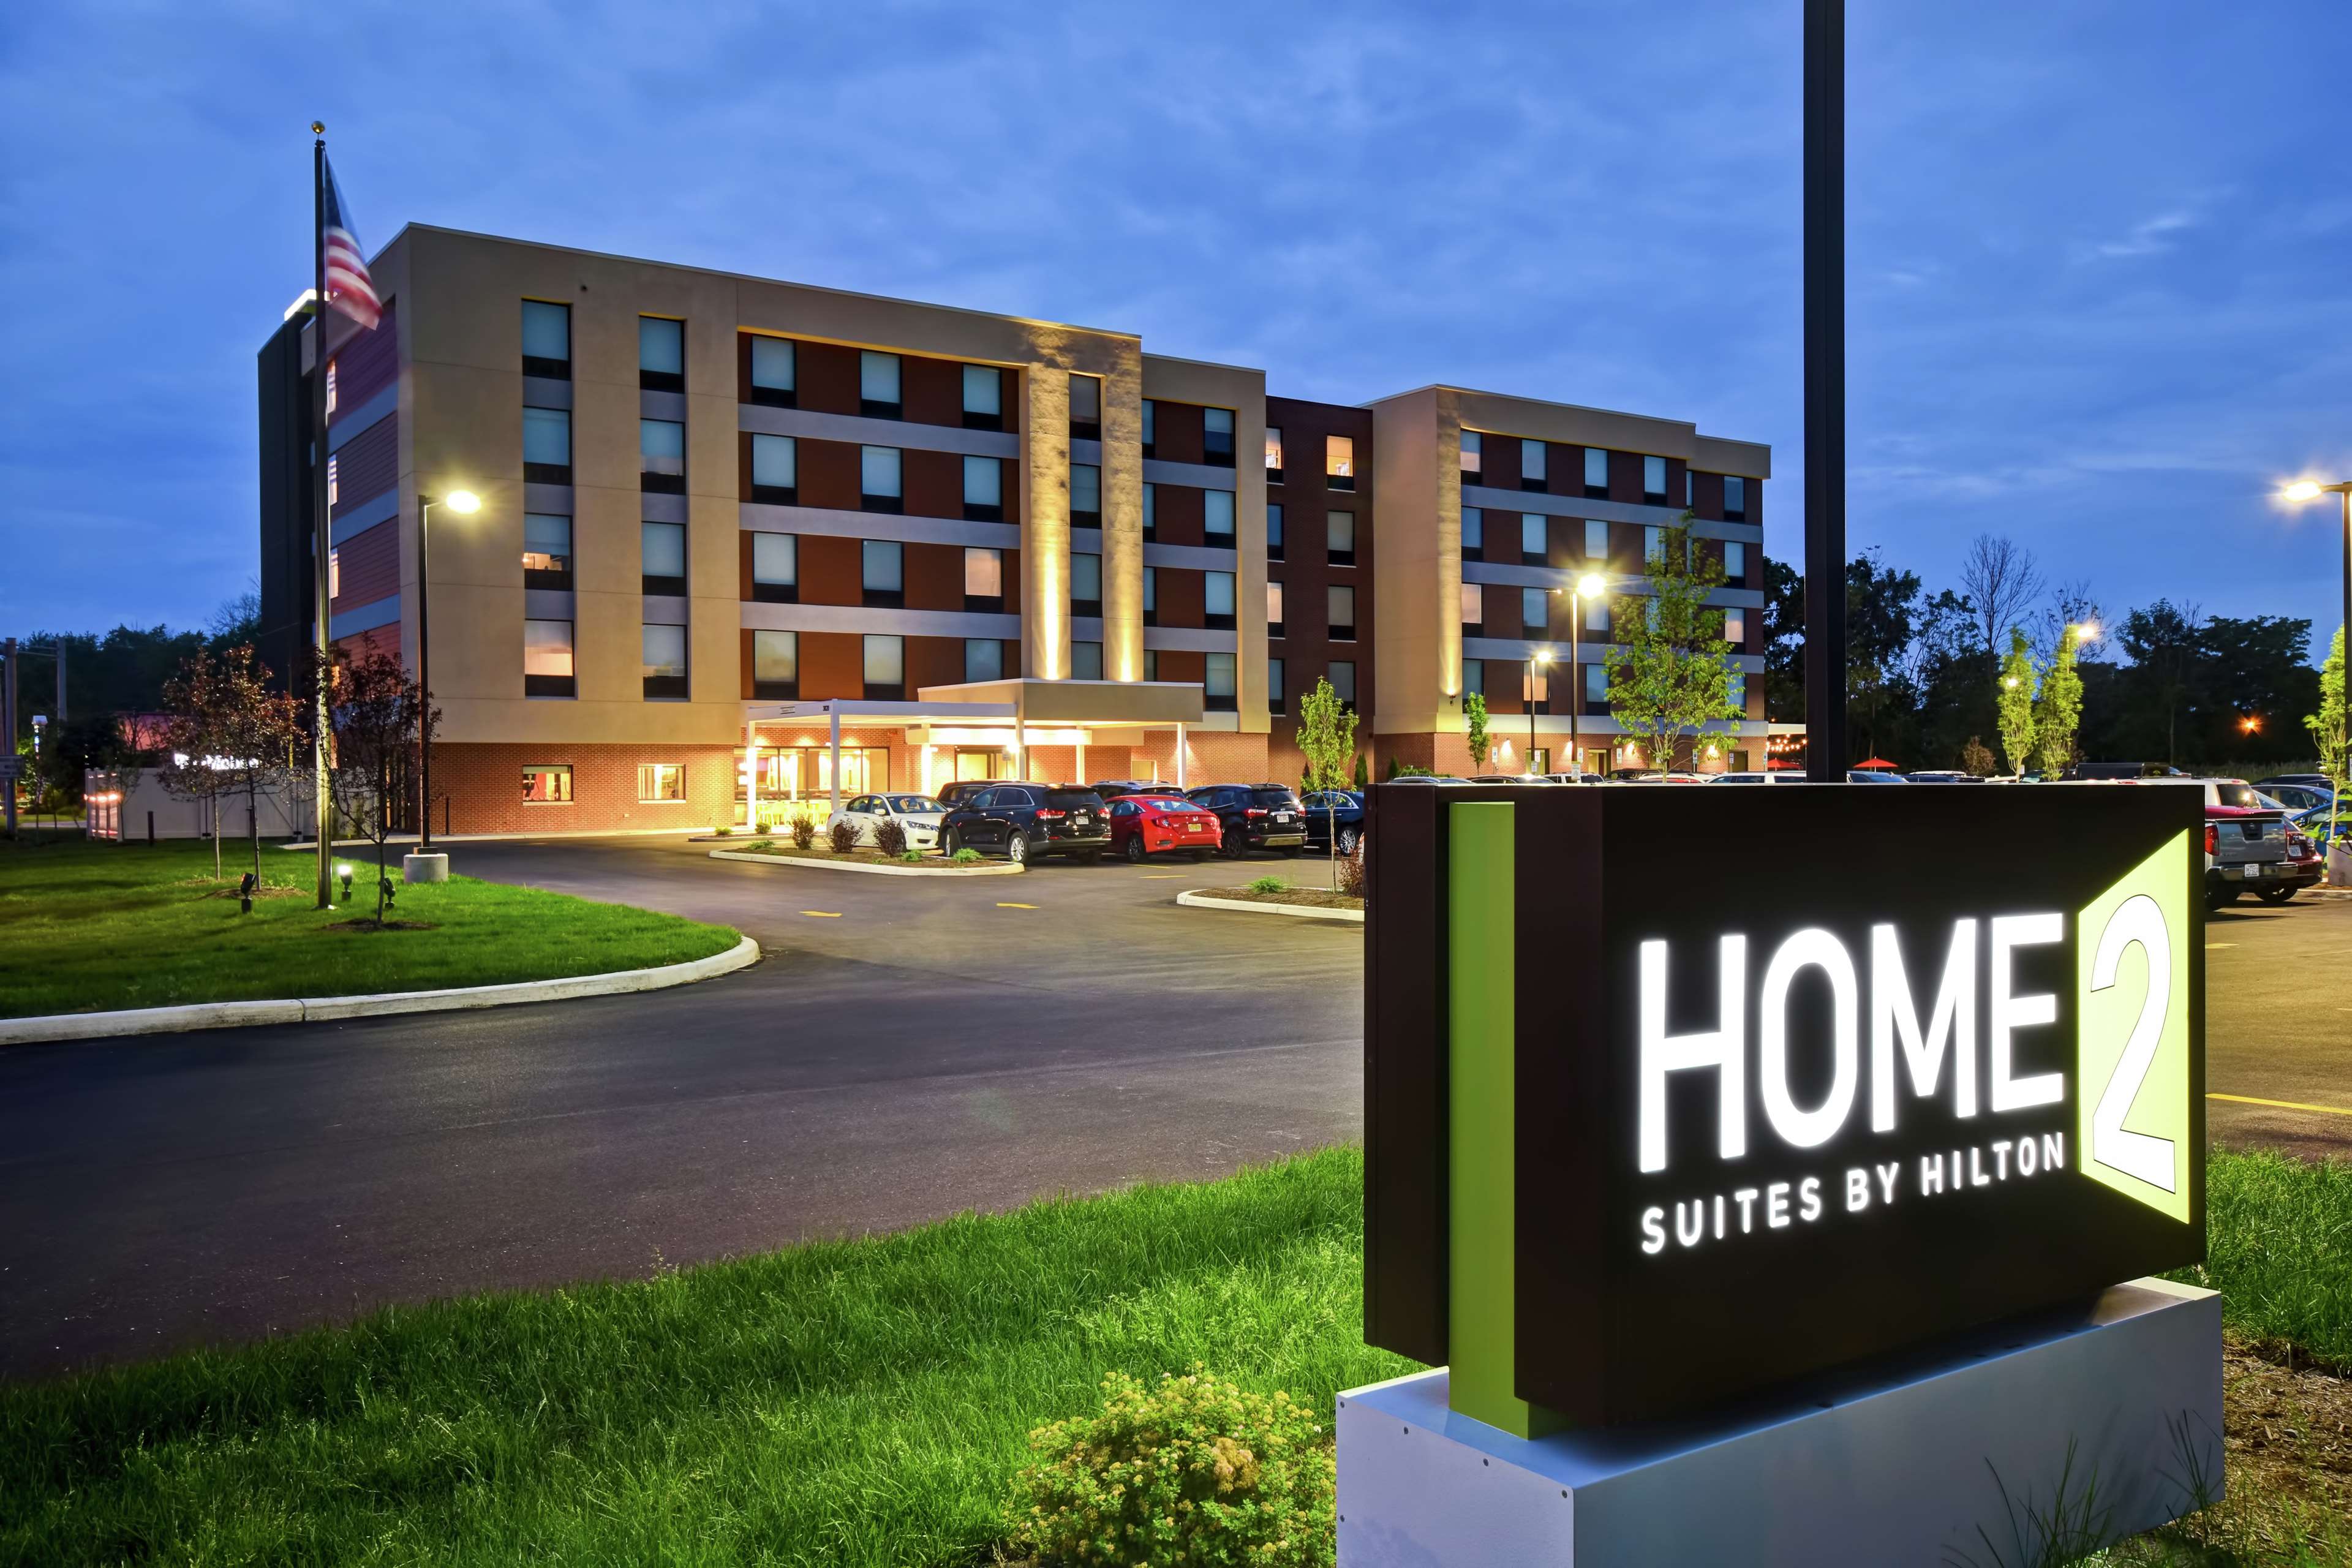 Home2 Suites by Hilton Amherst Buffalo Photo